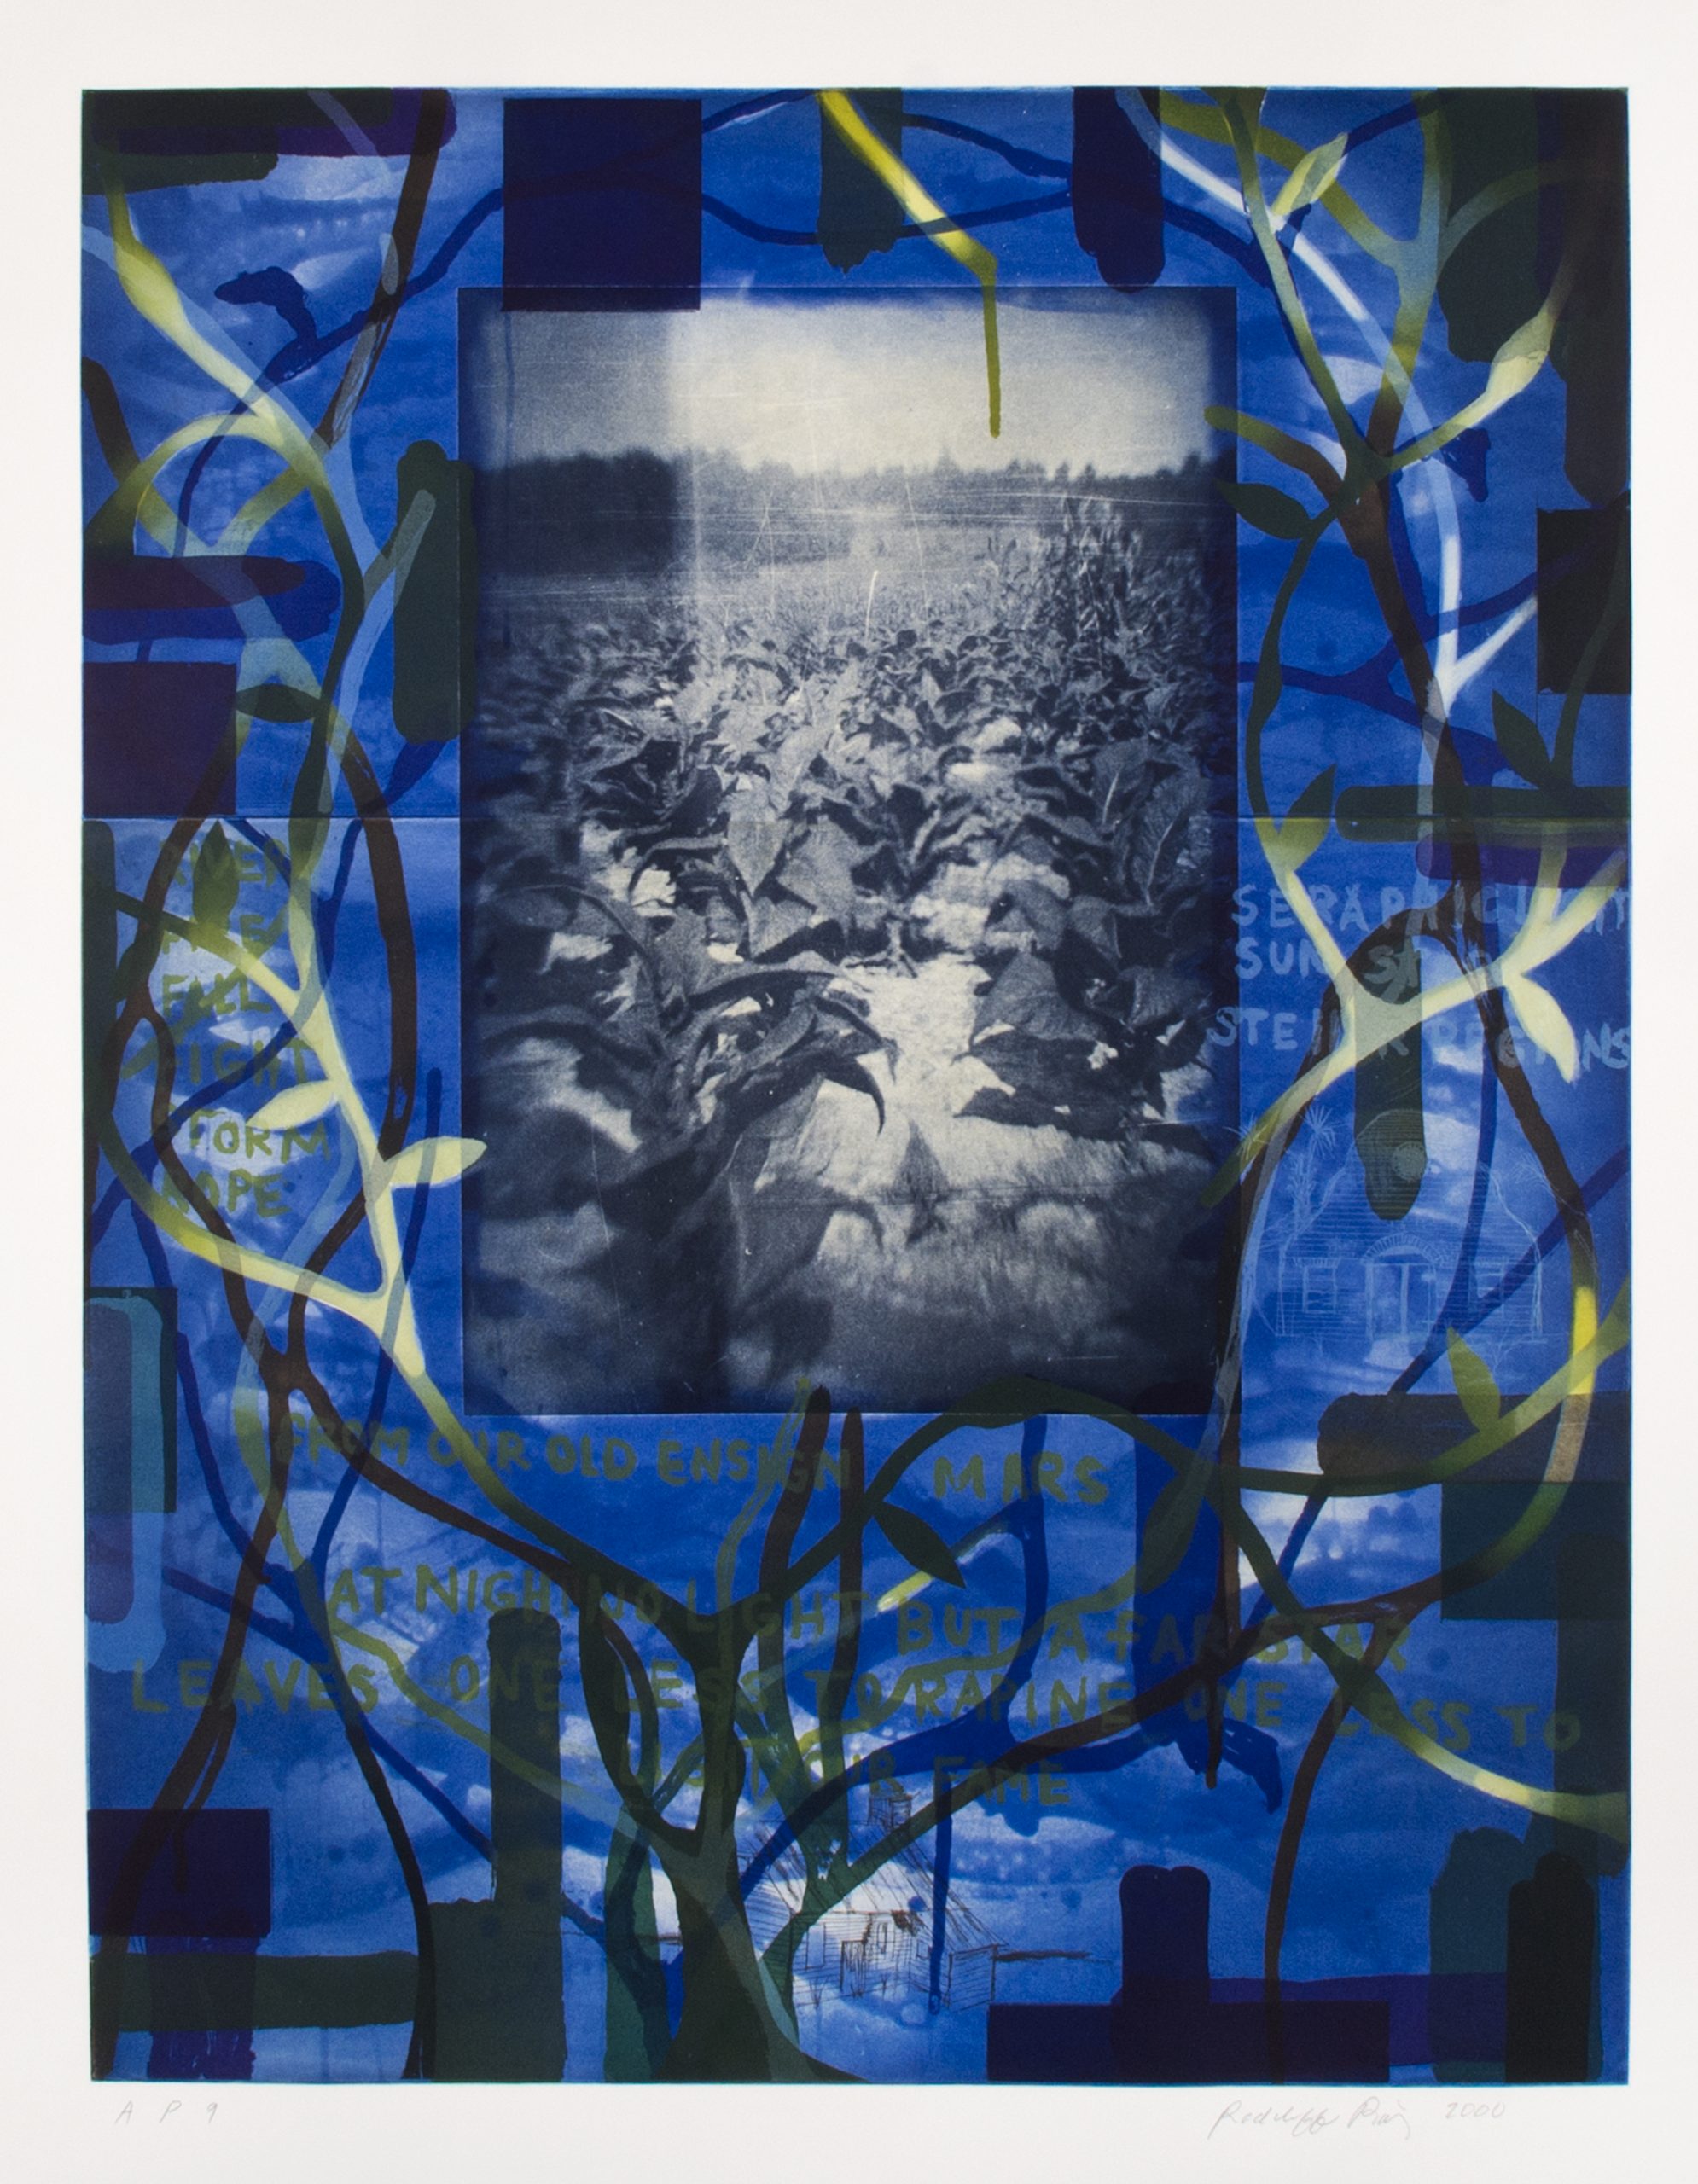 Cross and vine imagery surround an archival photo of a Virginia tobacco farm.